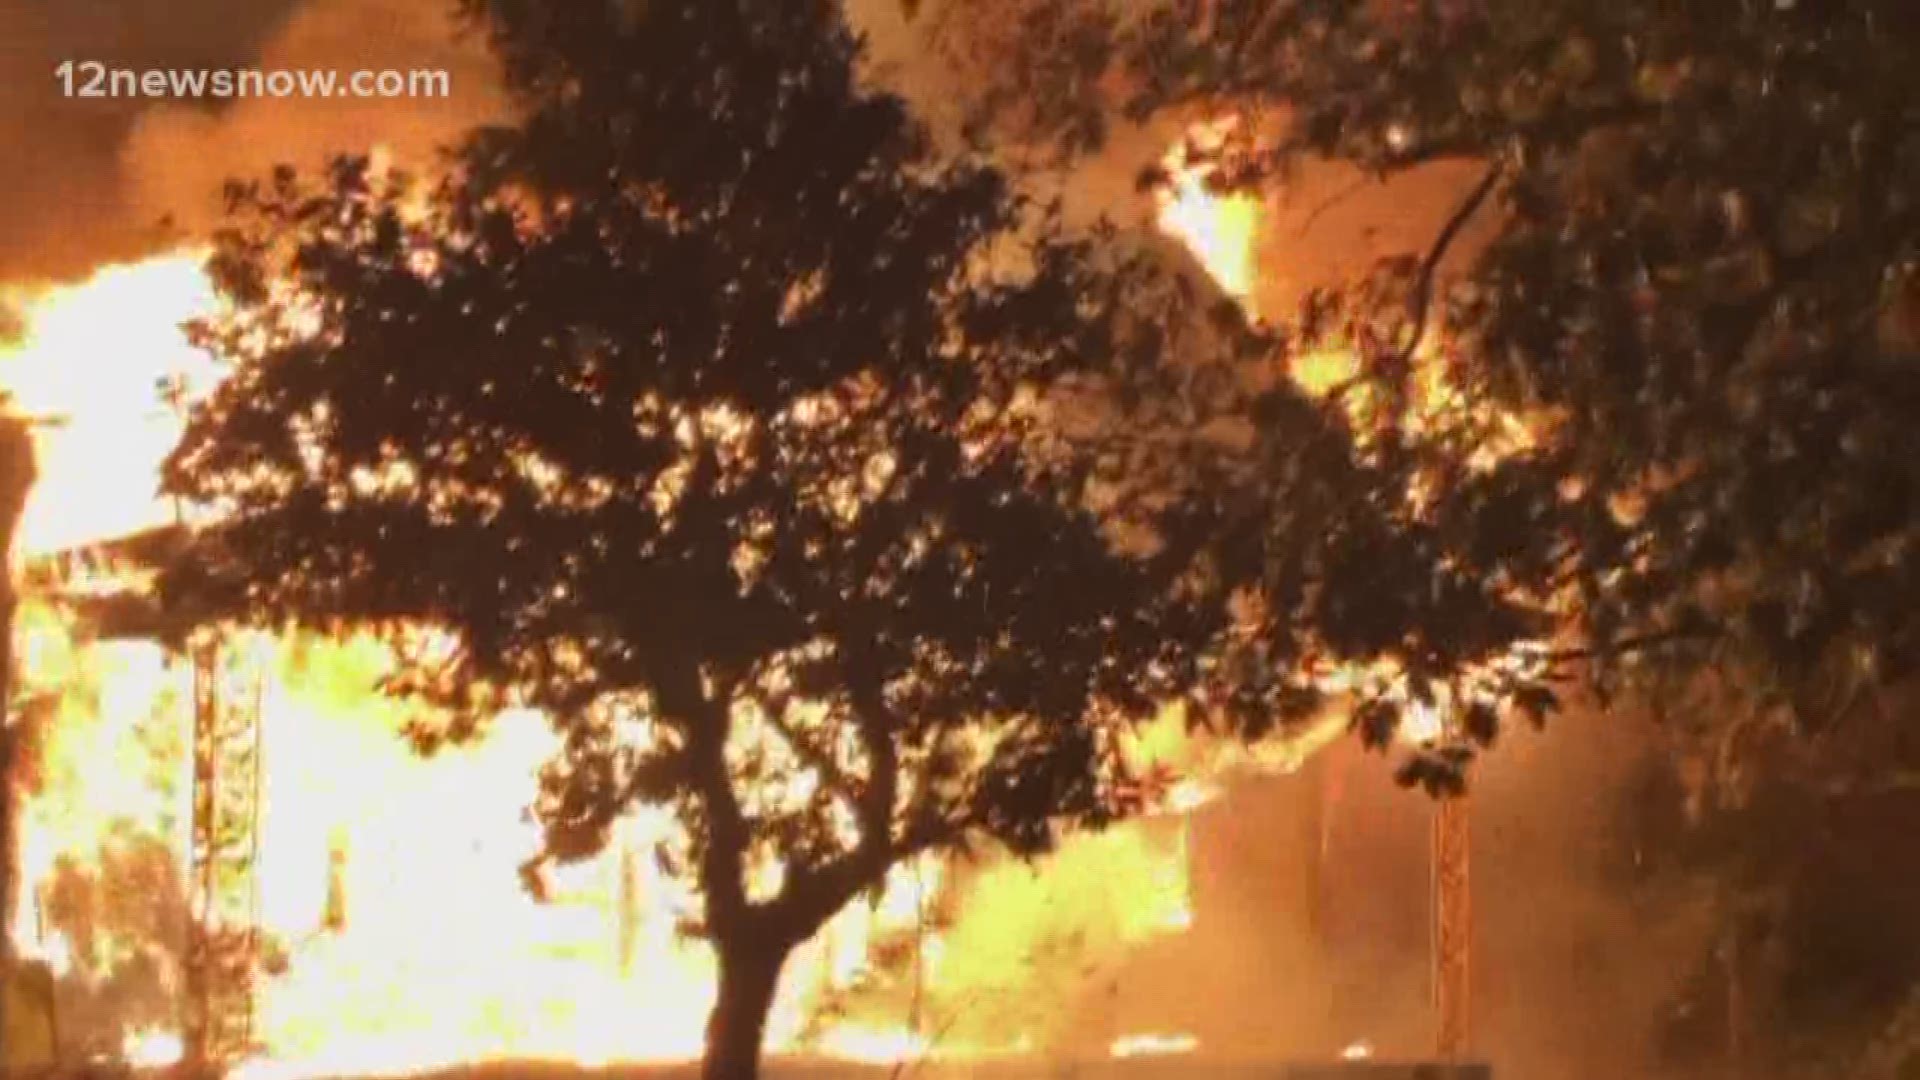 Three separate fires within a one mile radius in Beaumont; one injured